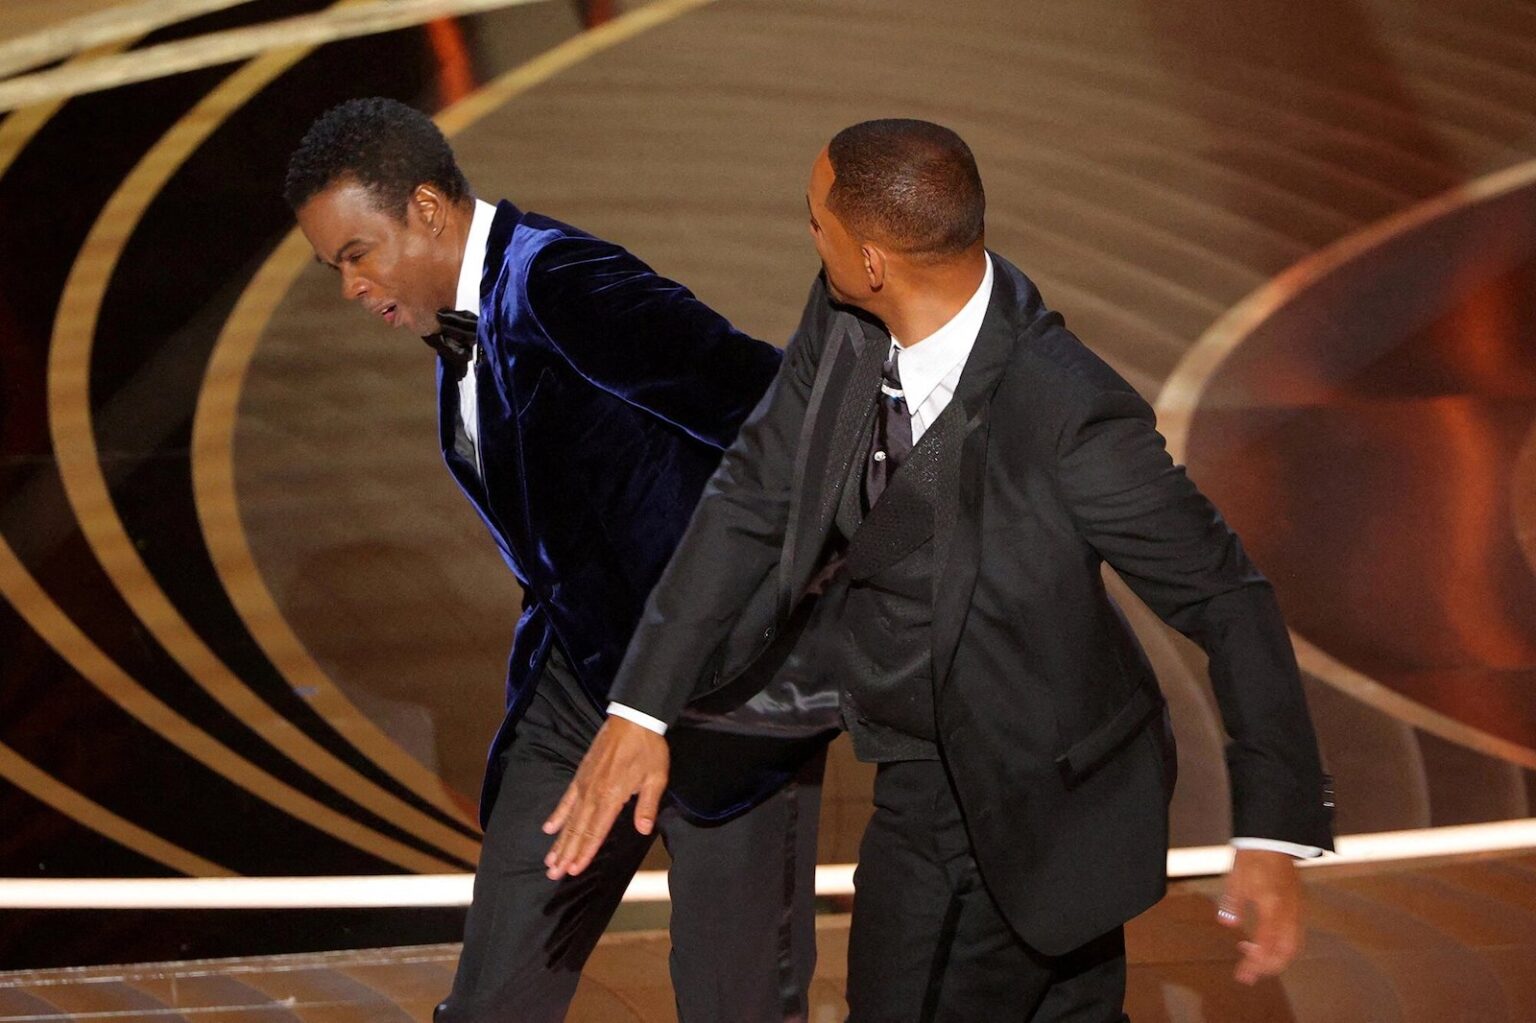 Everyone is still talking about the slap Will Smith gave to Chris Rock at the Oscars. Will this affect Will Smith's net worth?